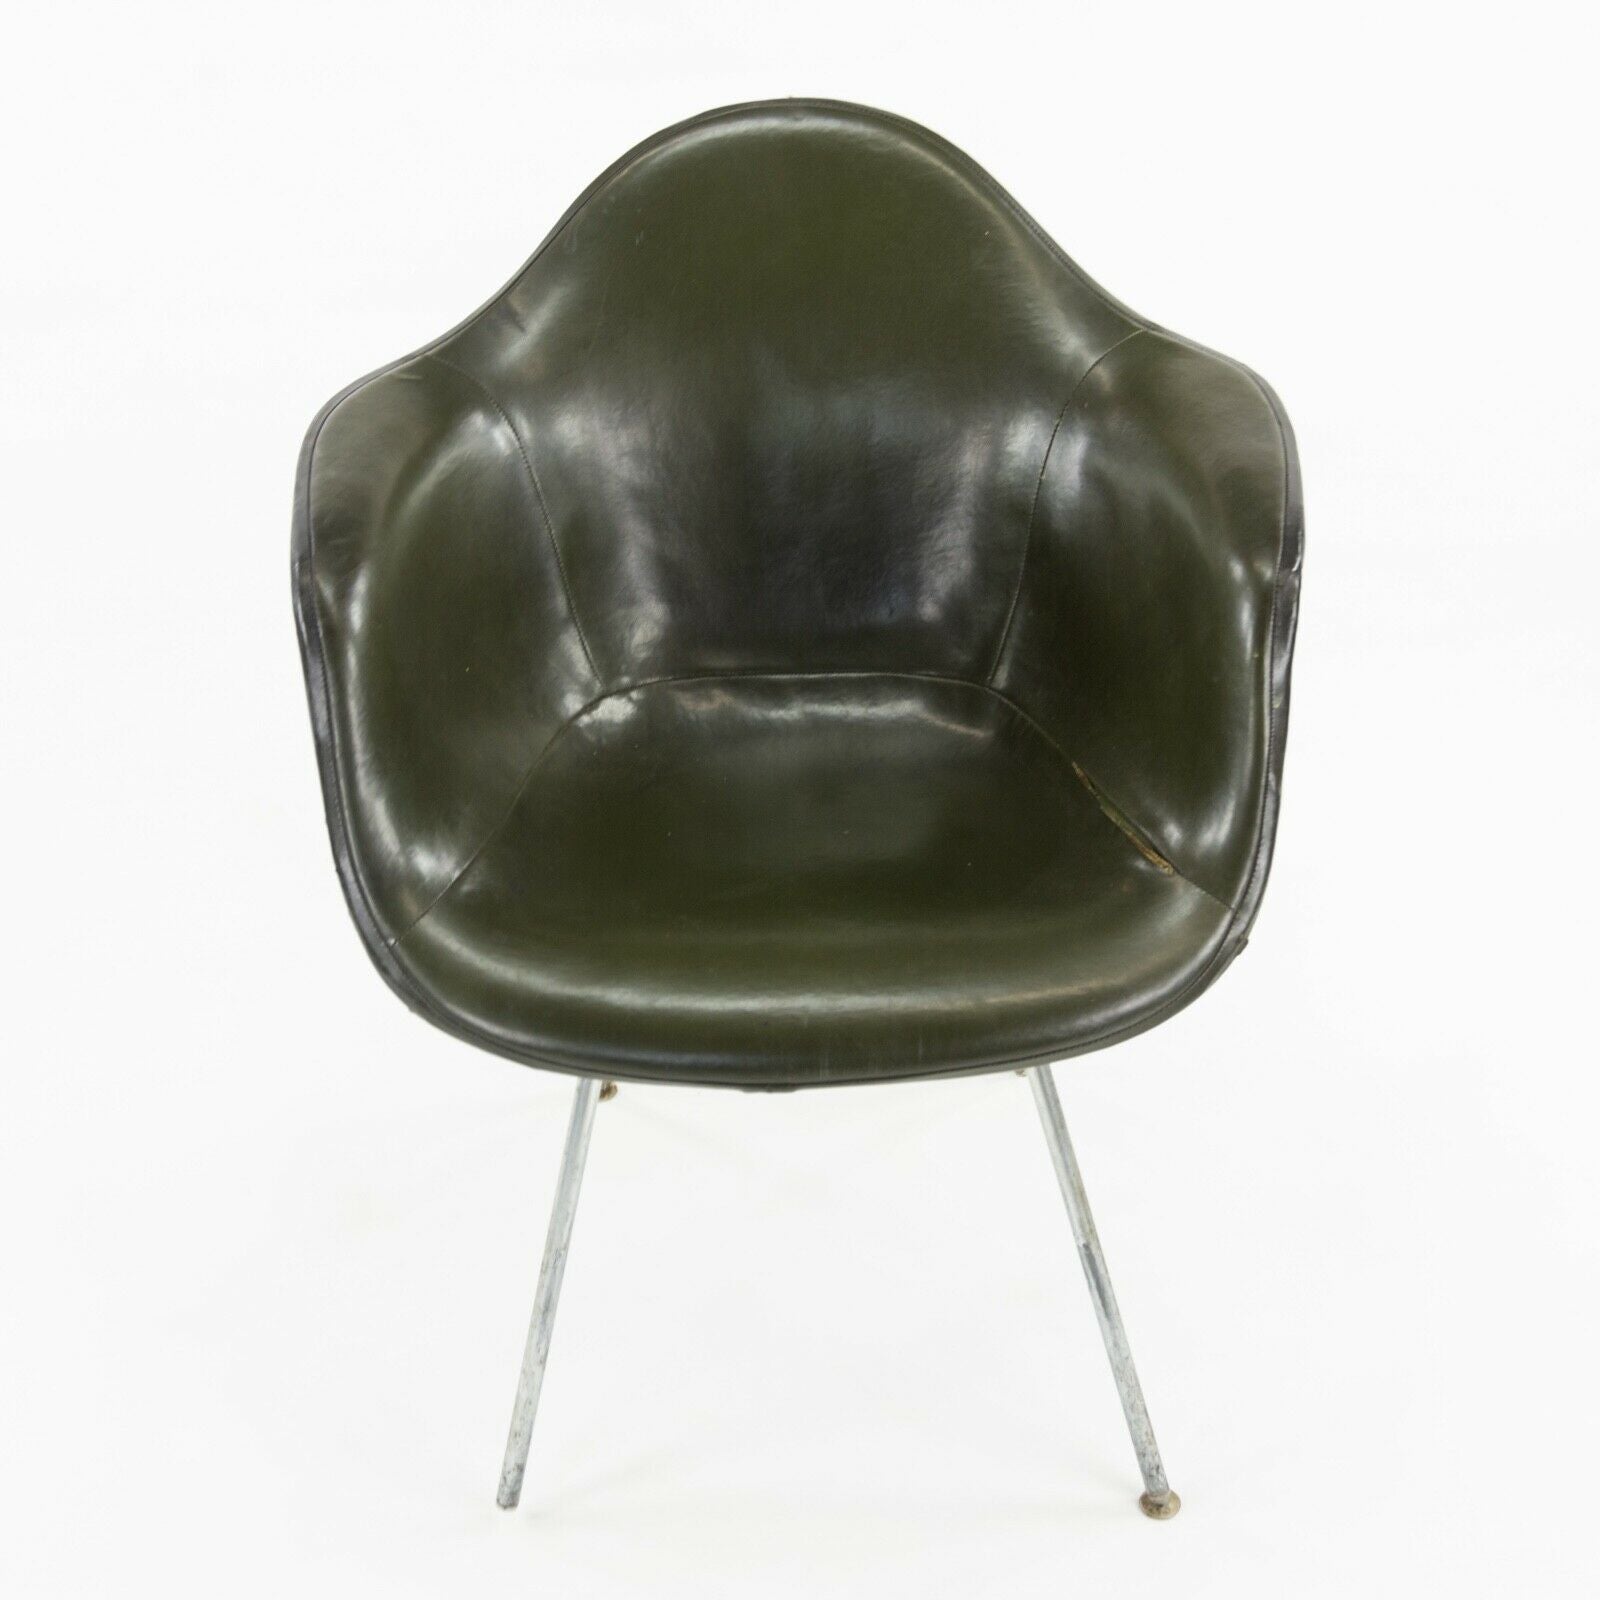 1959 Herman Miller Eames DAX Fiberglass Arm Shell Chair with Green Removable Pad